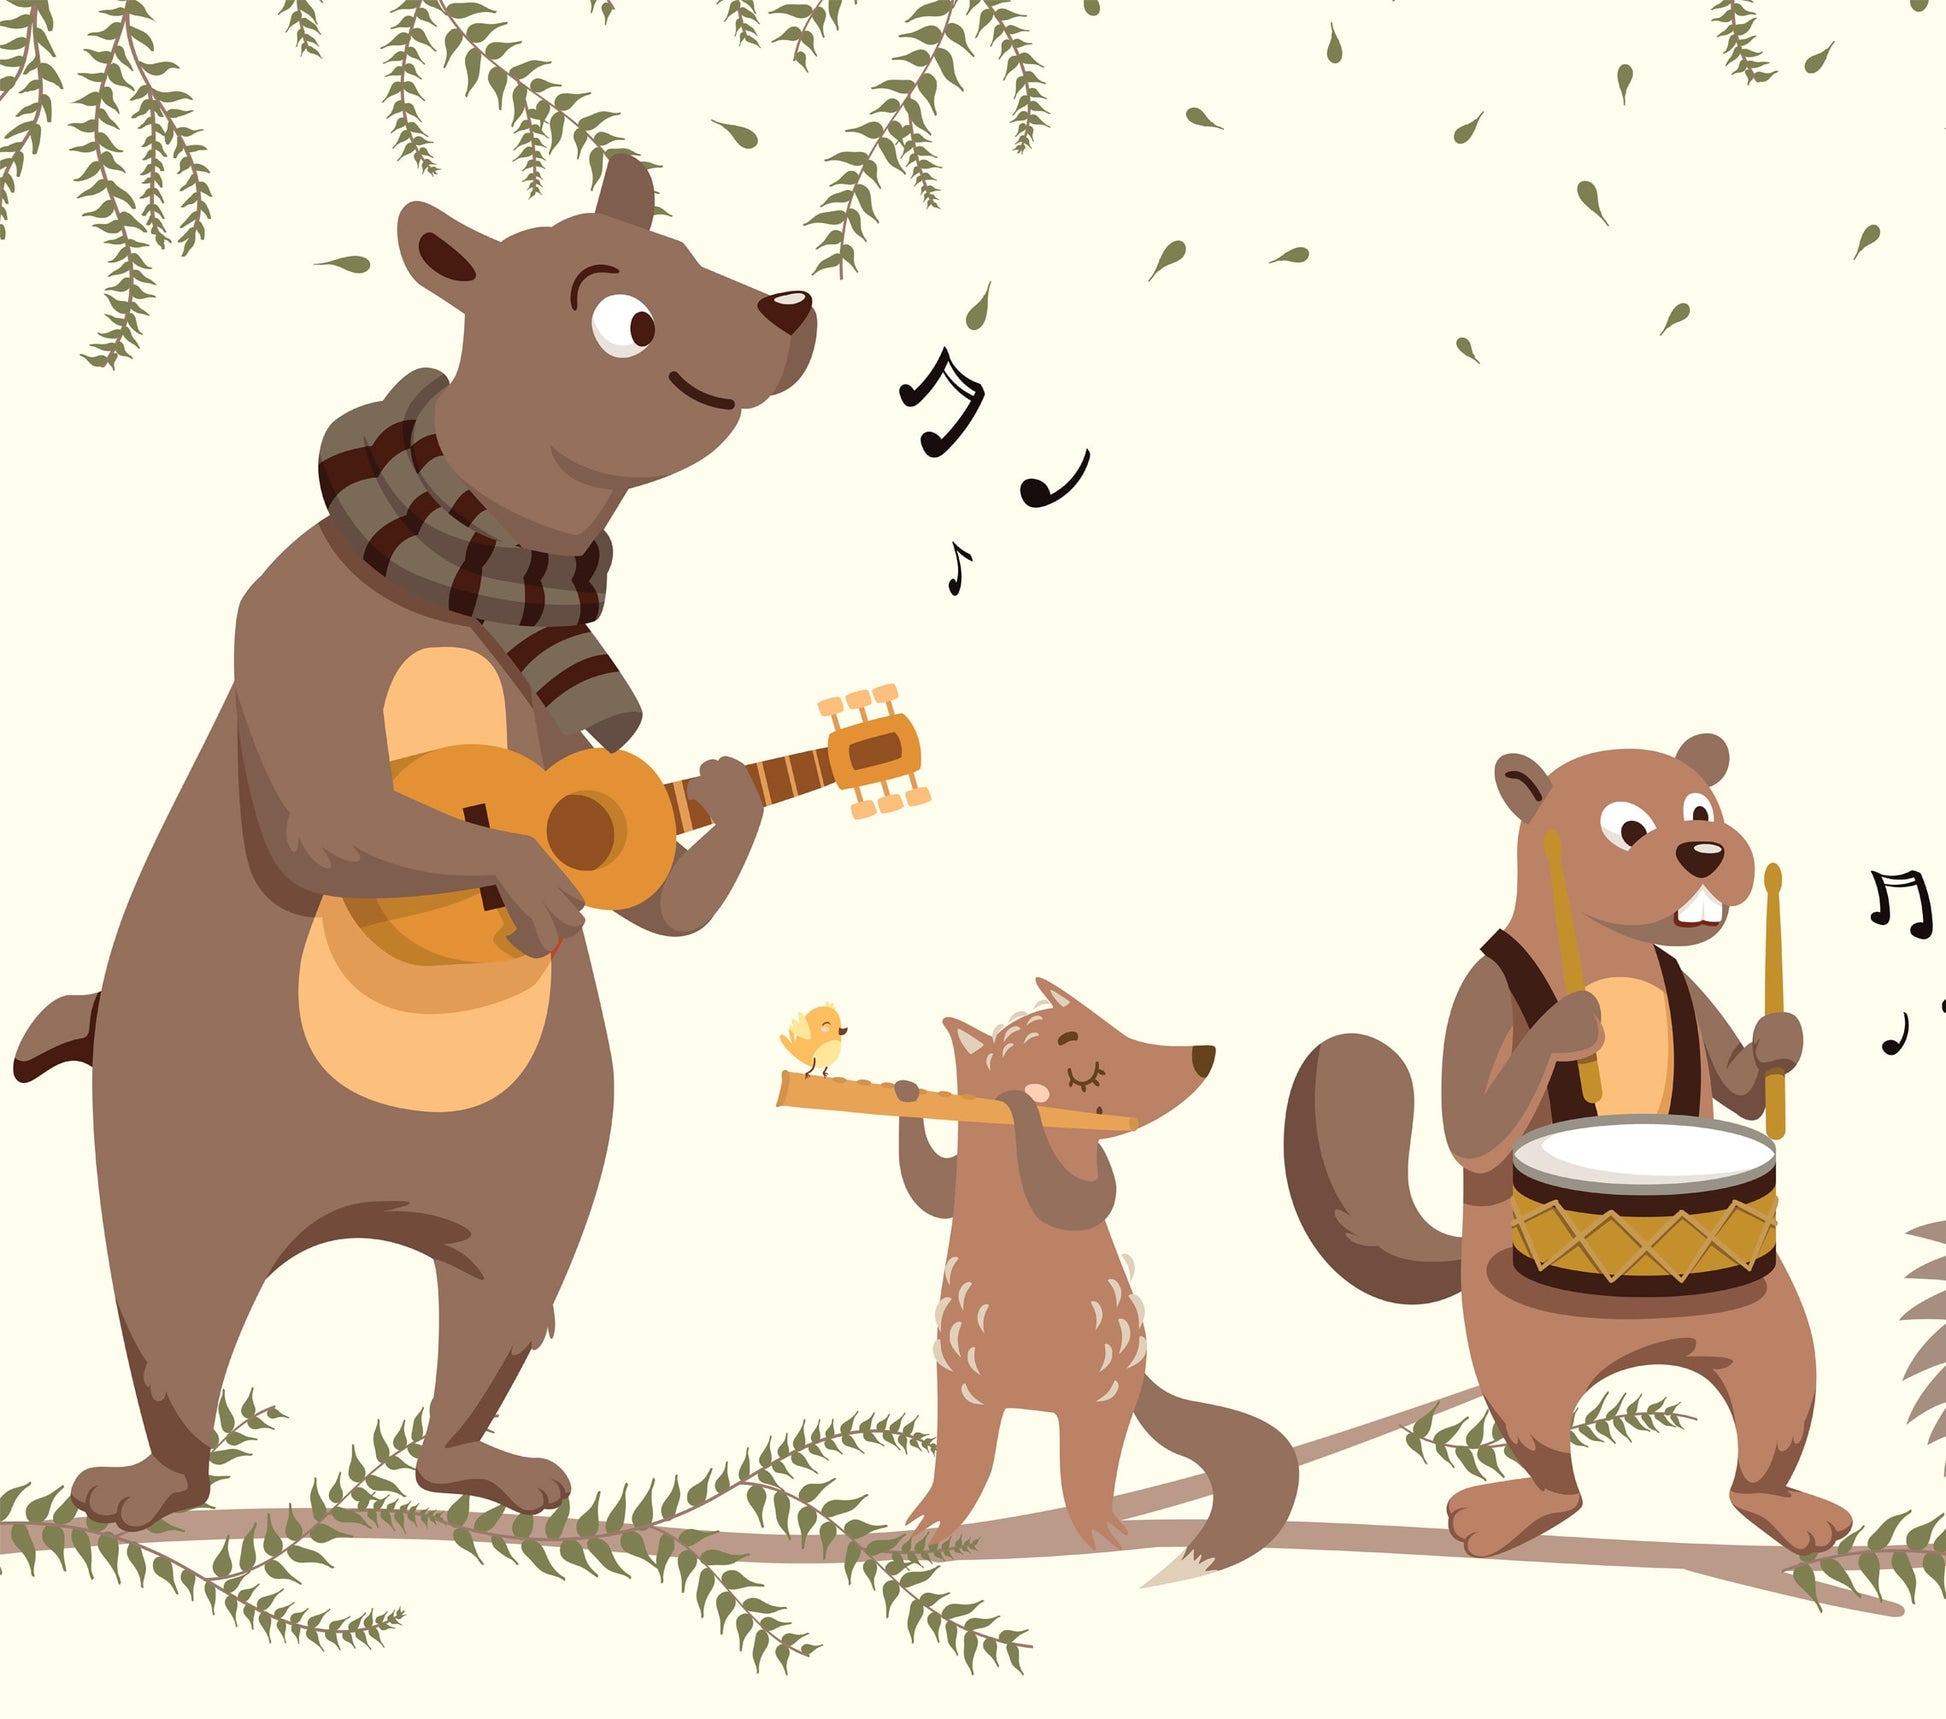 Animals Playing Musical Instruments, Wallpaper Theme for kids Room